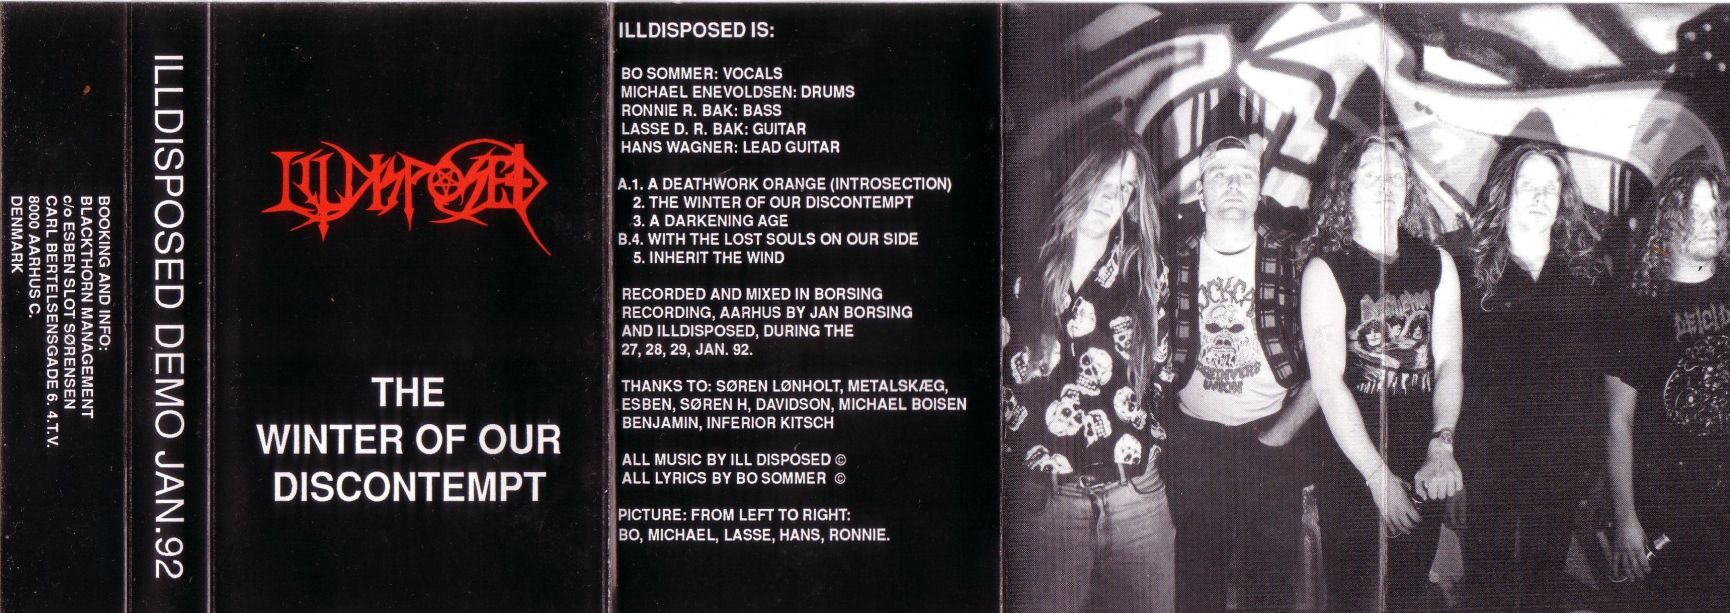 Illdisposed - The Winter of Our Discontempt